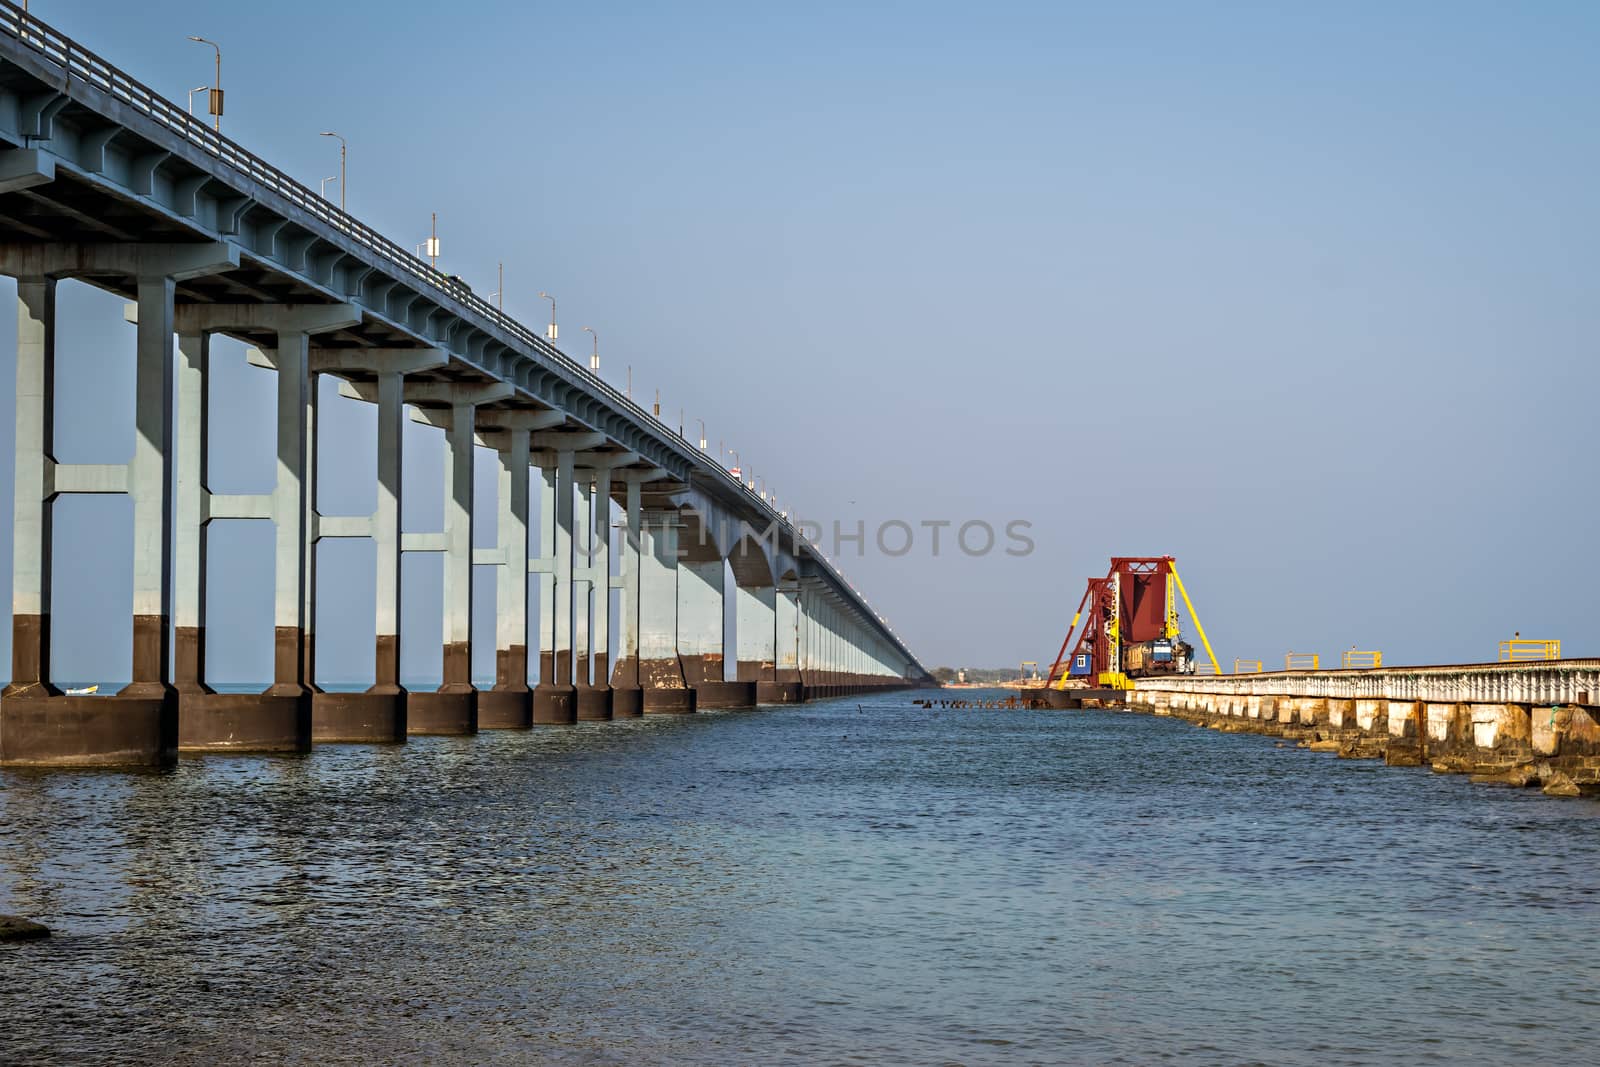 More than 100 years old India's first sea bridge for railway and a tall road bridge connecting Pamban island to mainland India. A train is passing through openable portion railway bridge.